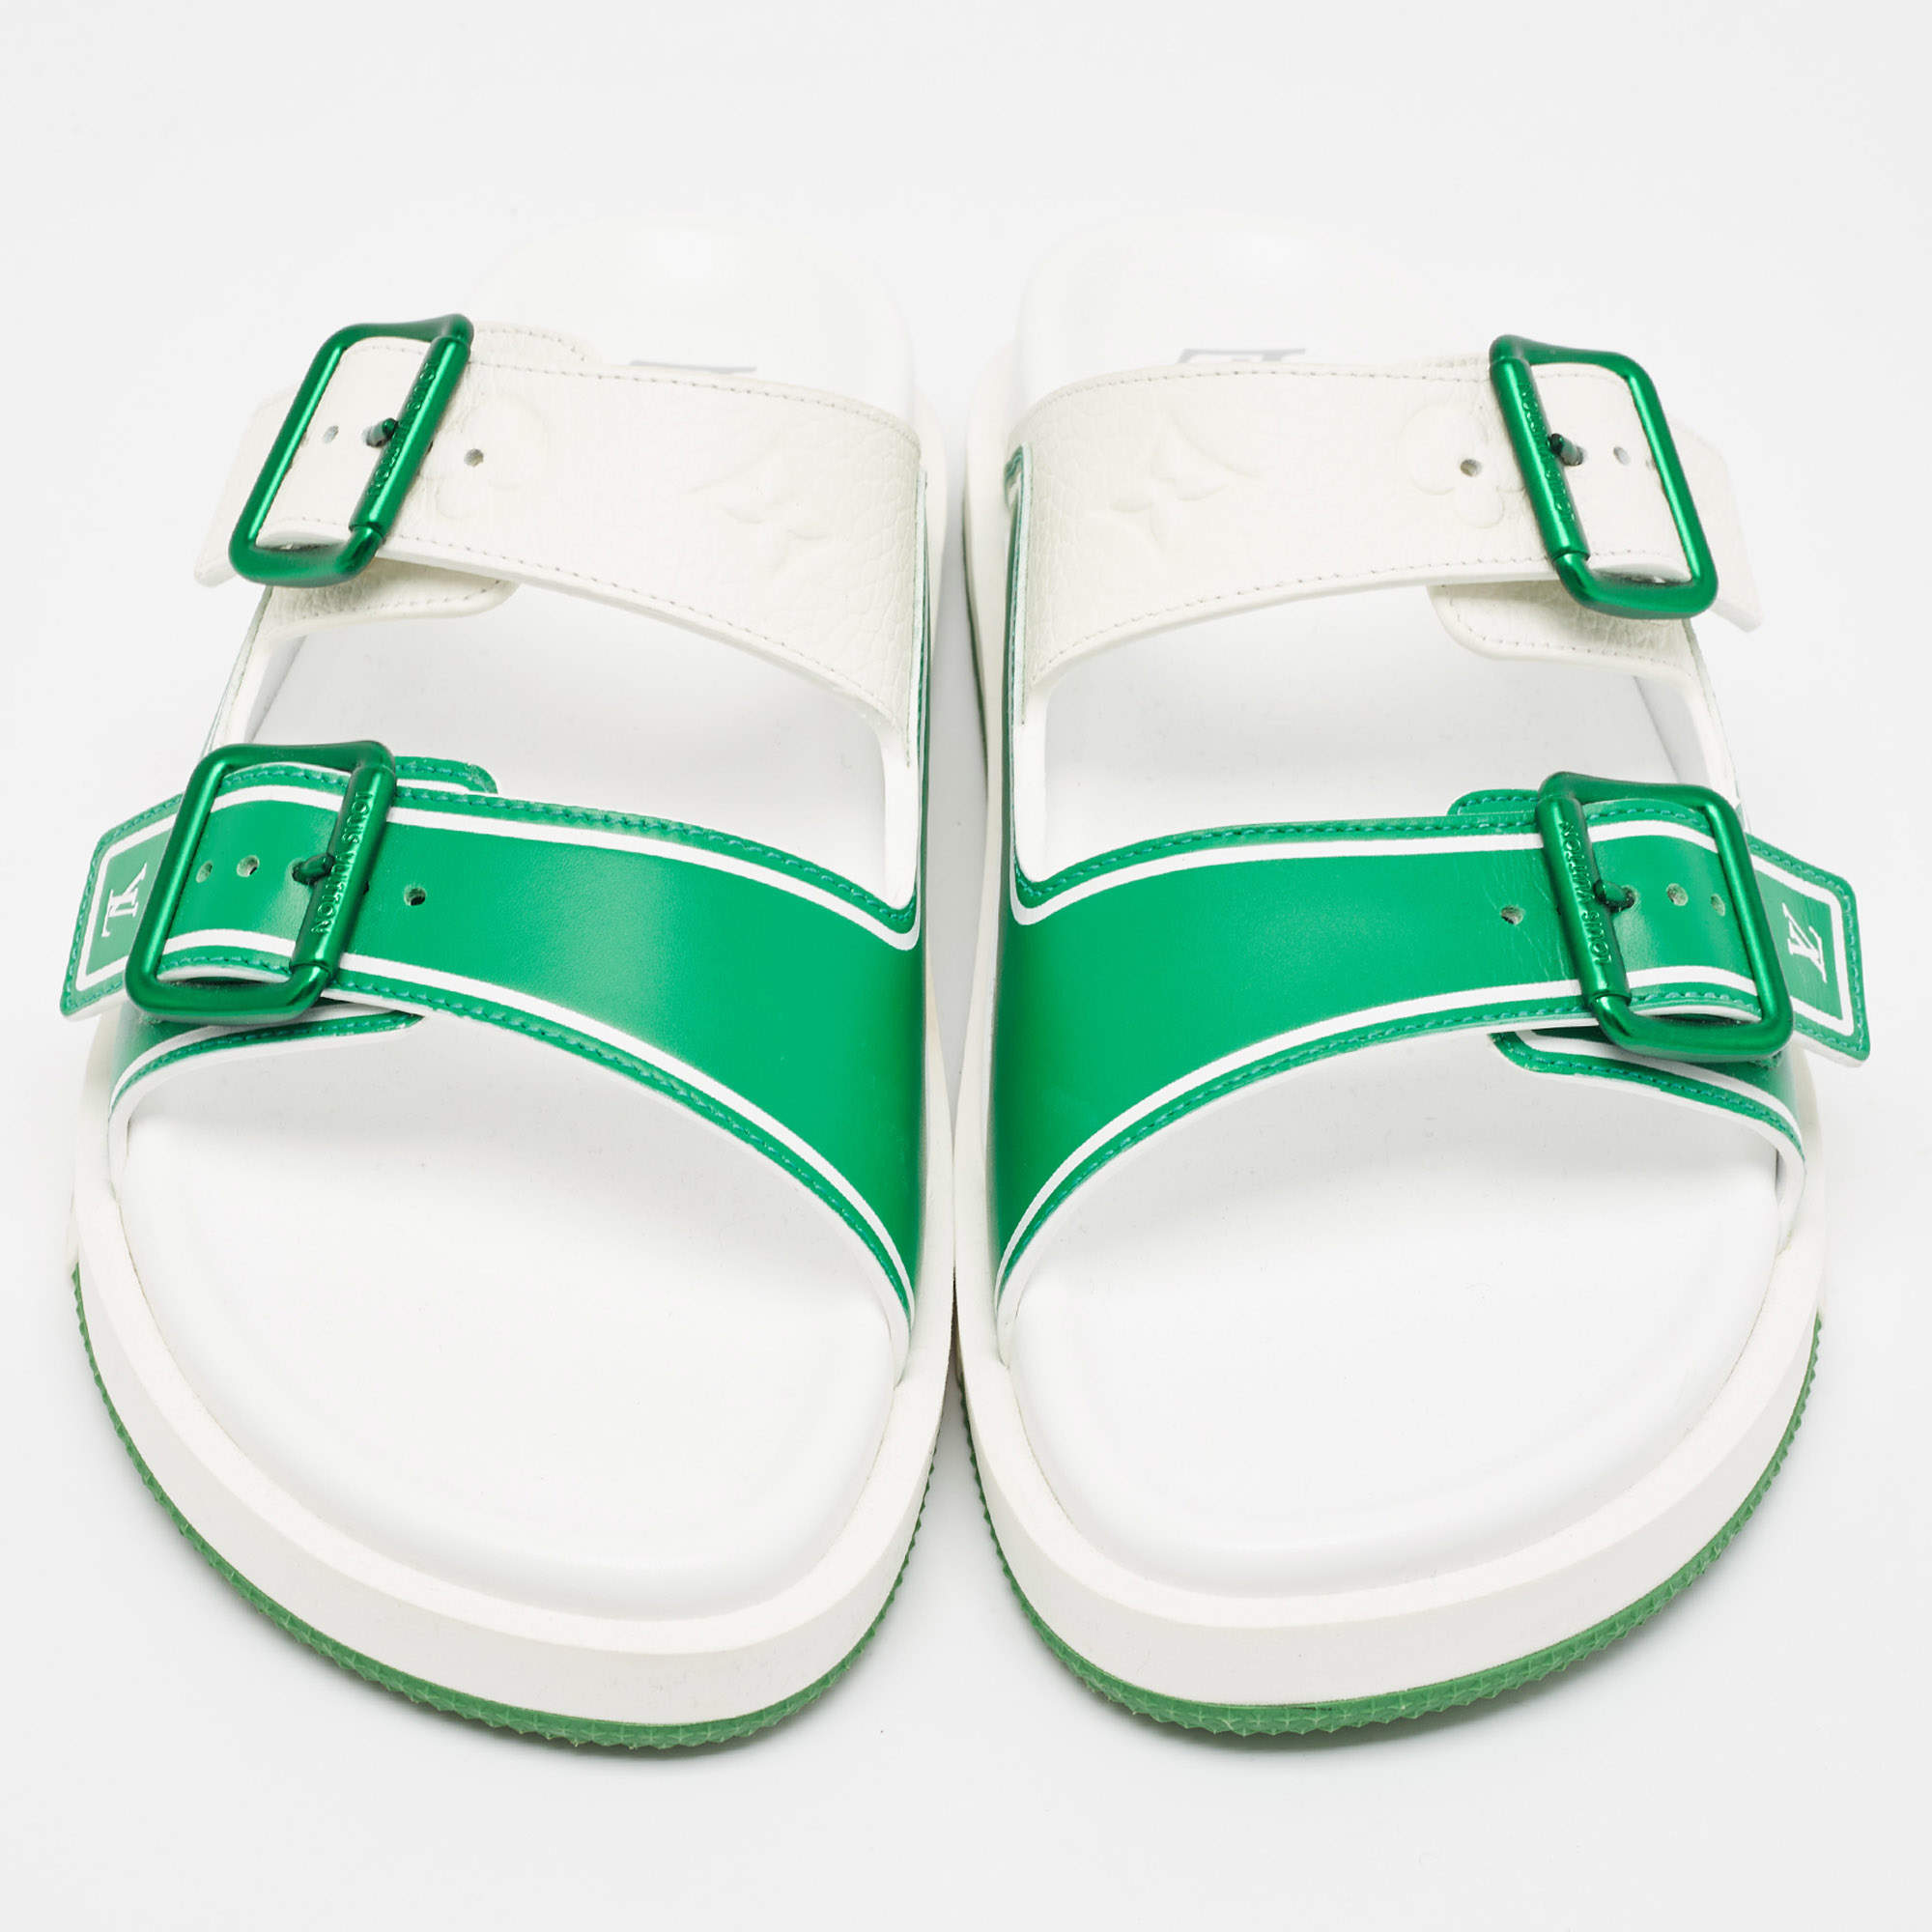 Louis Vuitton White/Green Monogram Embossed Leather LV Trainer Sandals Size 41